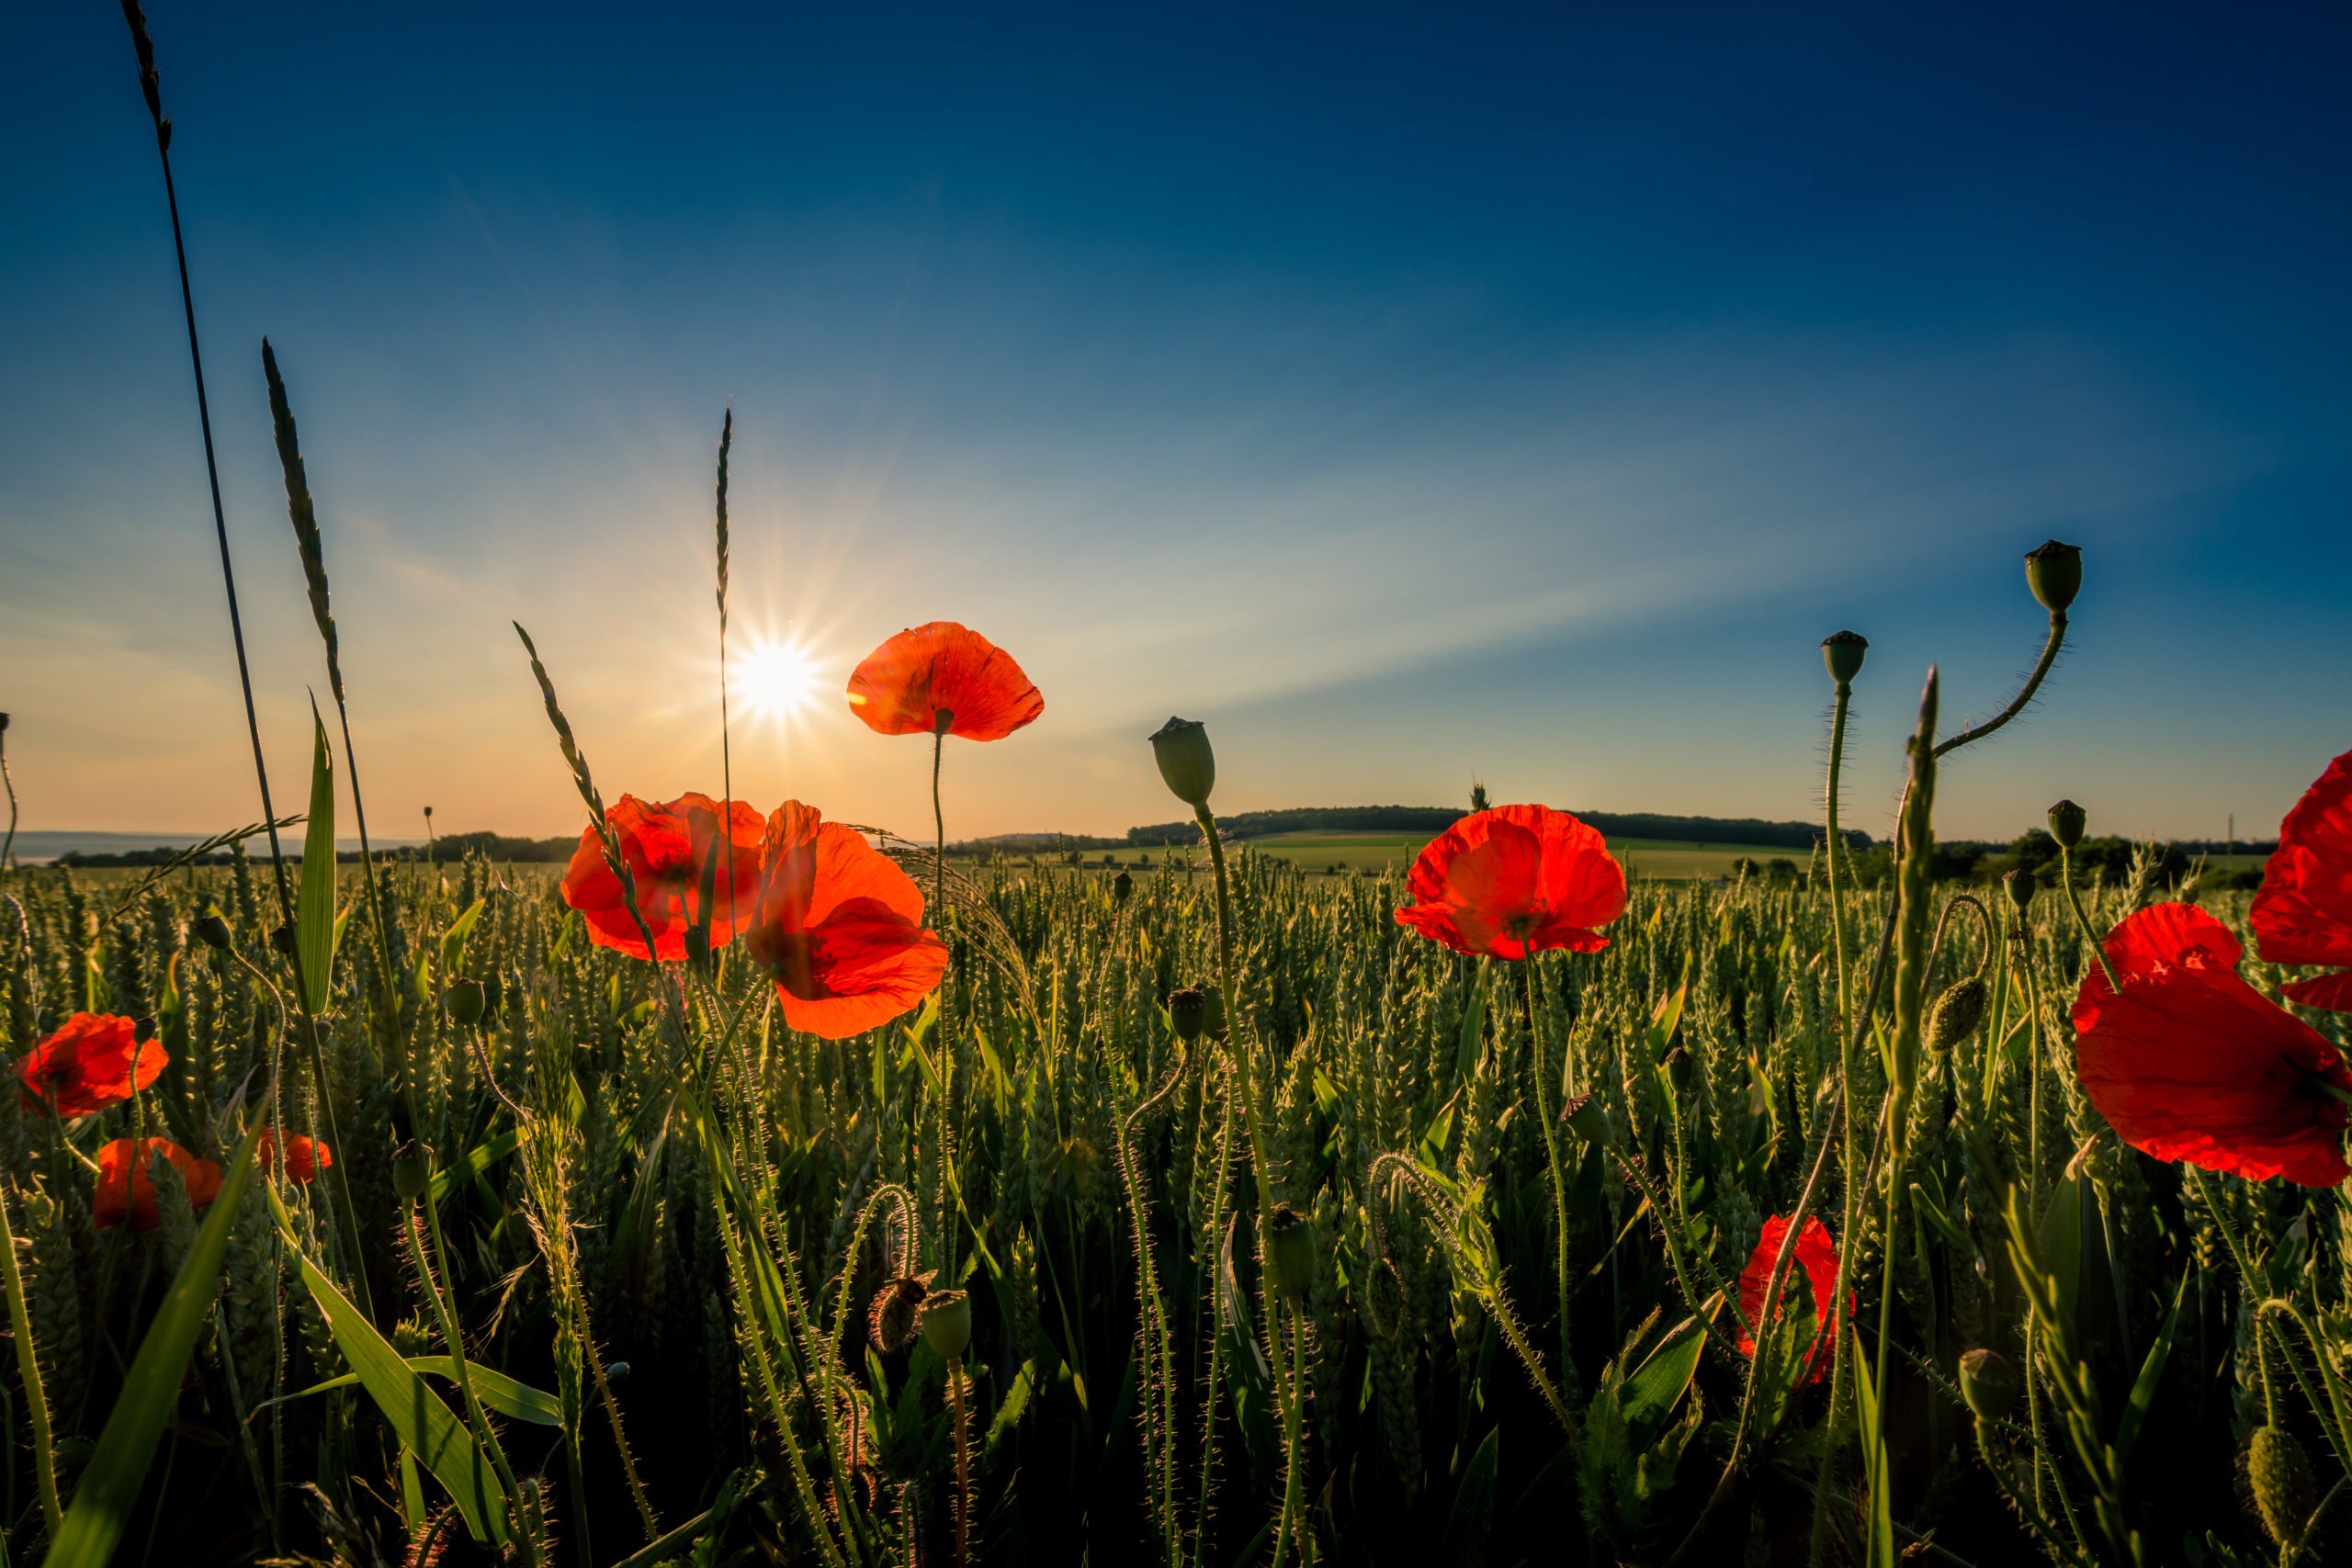 Red poppy flowers and wheat.